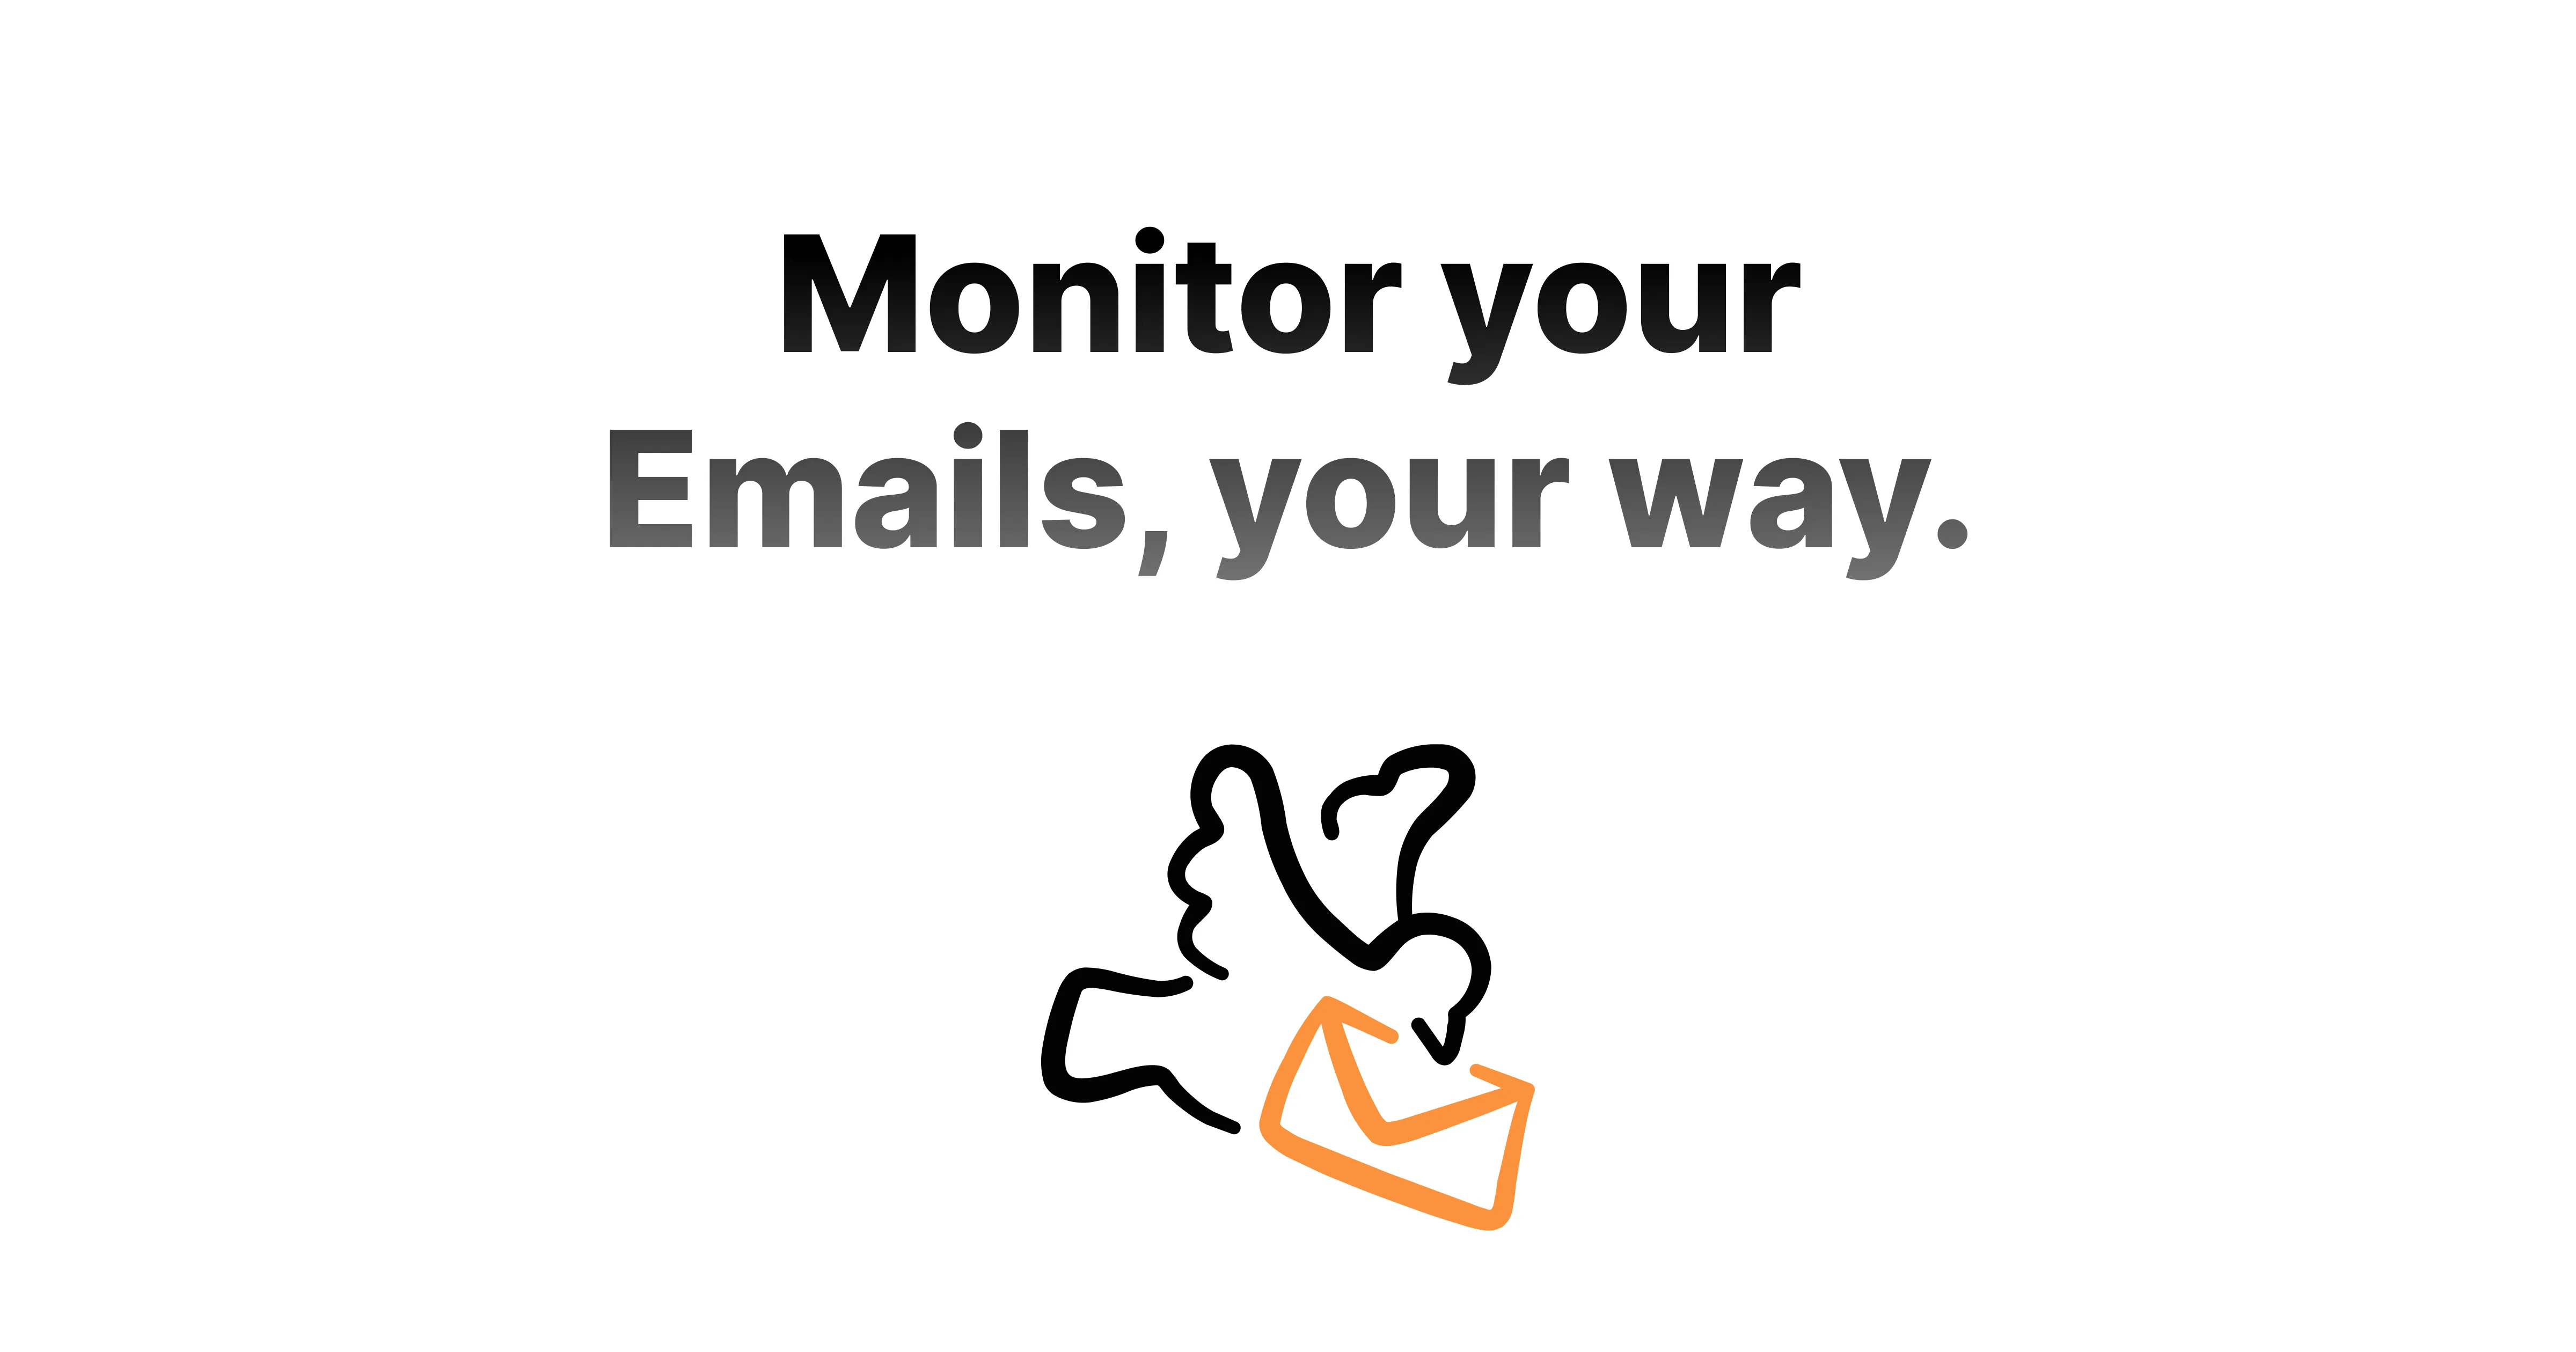 Monitor your Emails, your way.